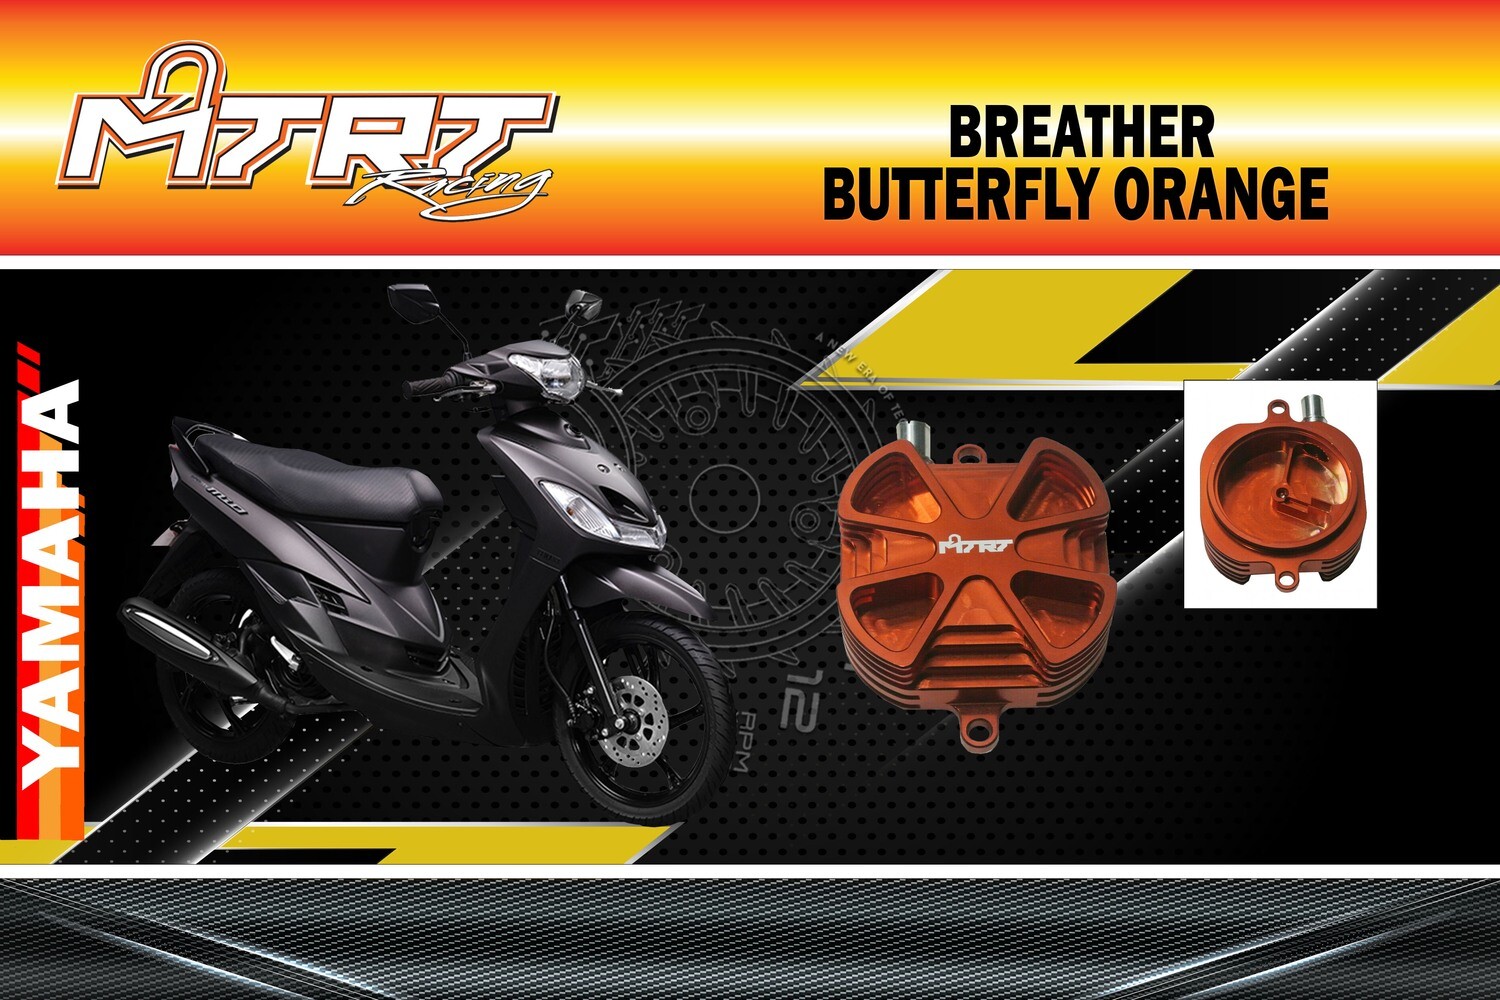 BREATHER COVER MIO 4v MTRT Orange BUTTERFLY